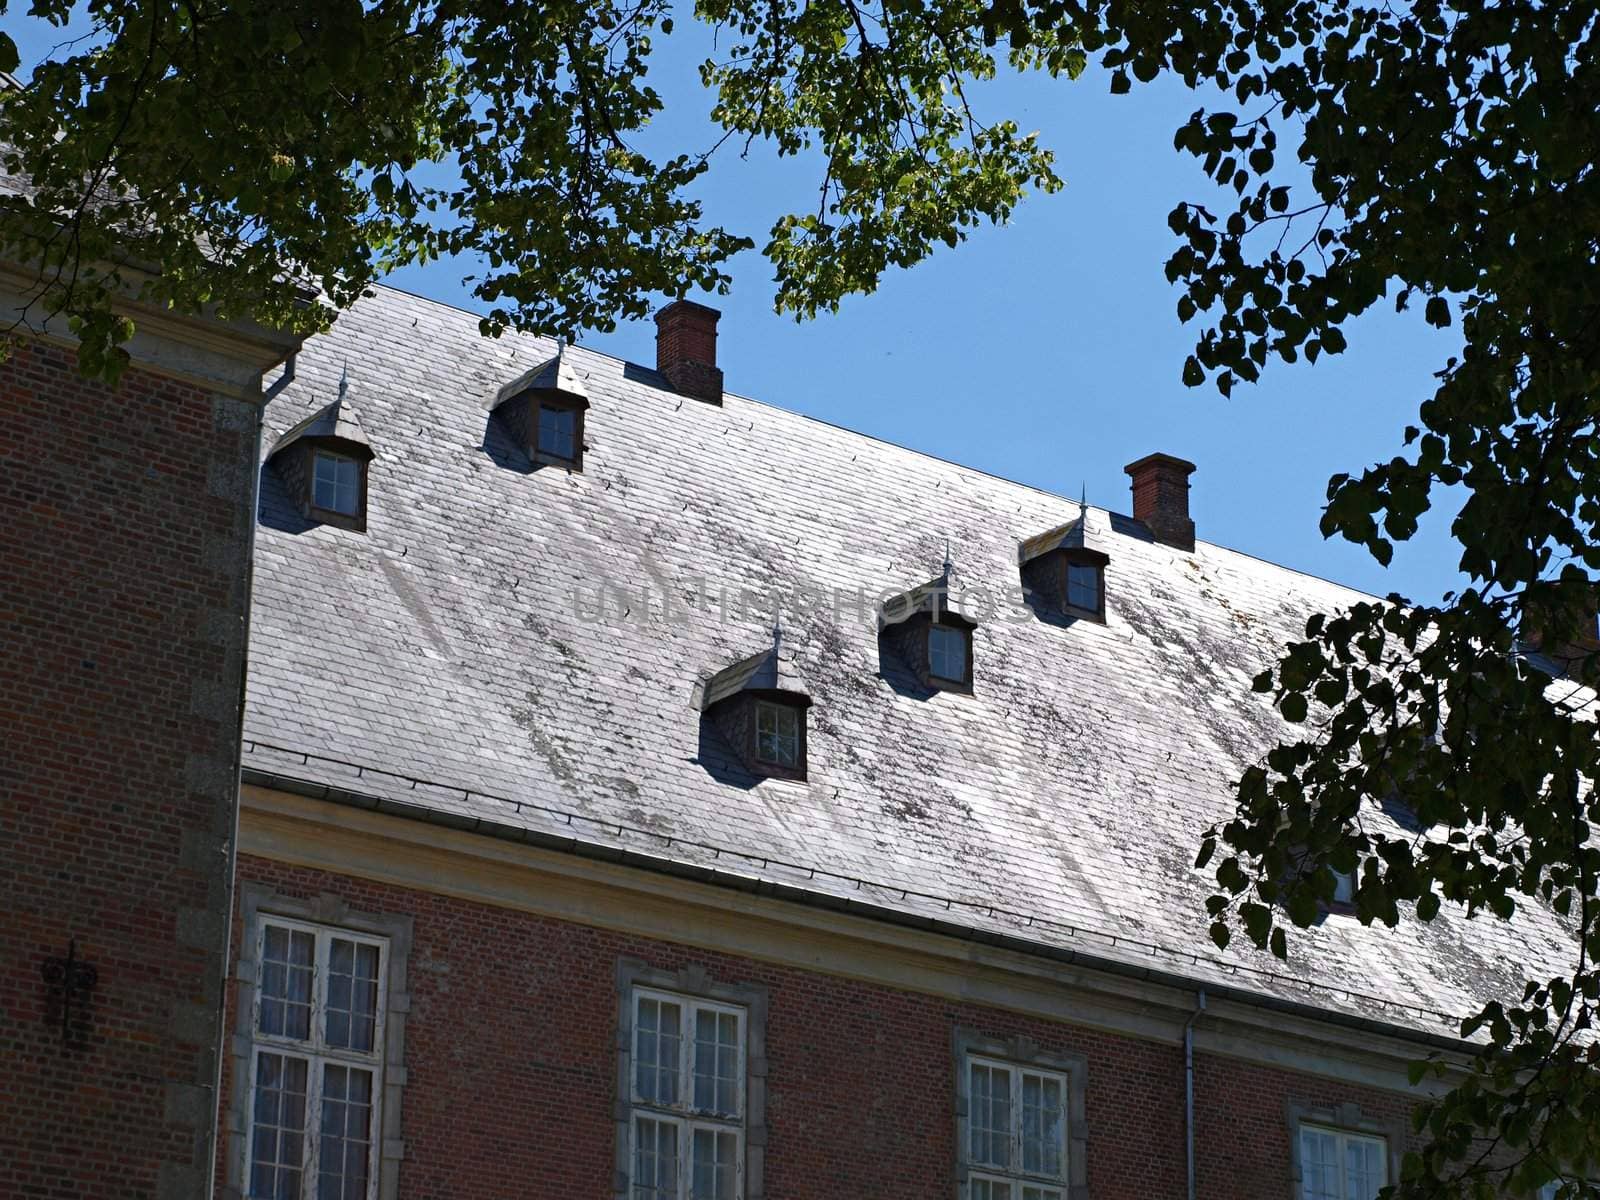 Big roof of a classical castle with attic windows dormer Denmark